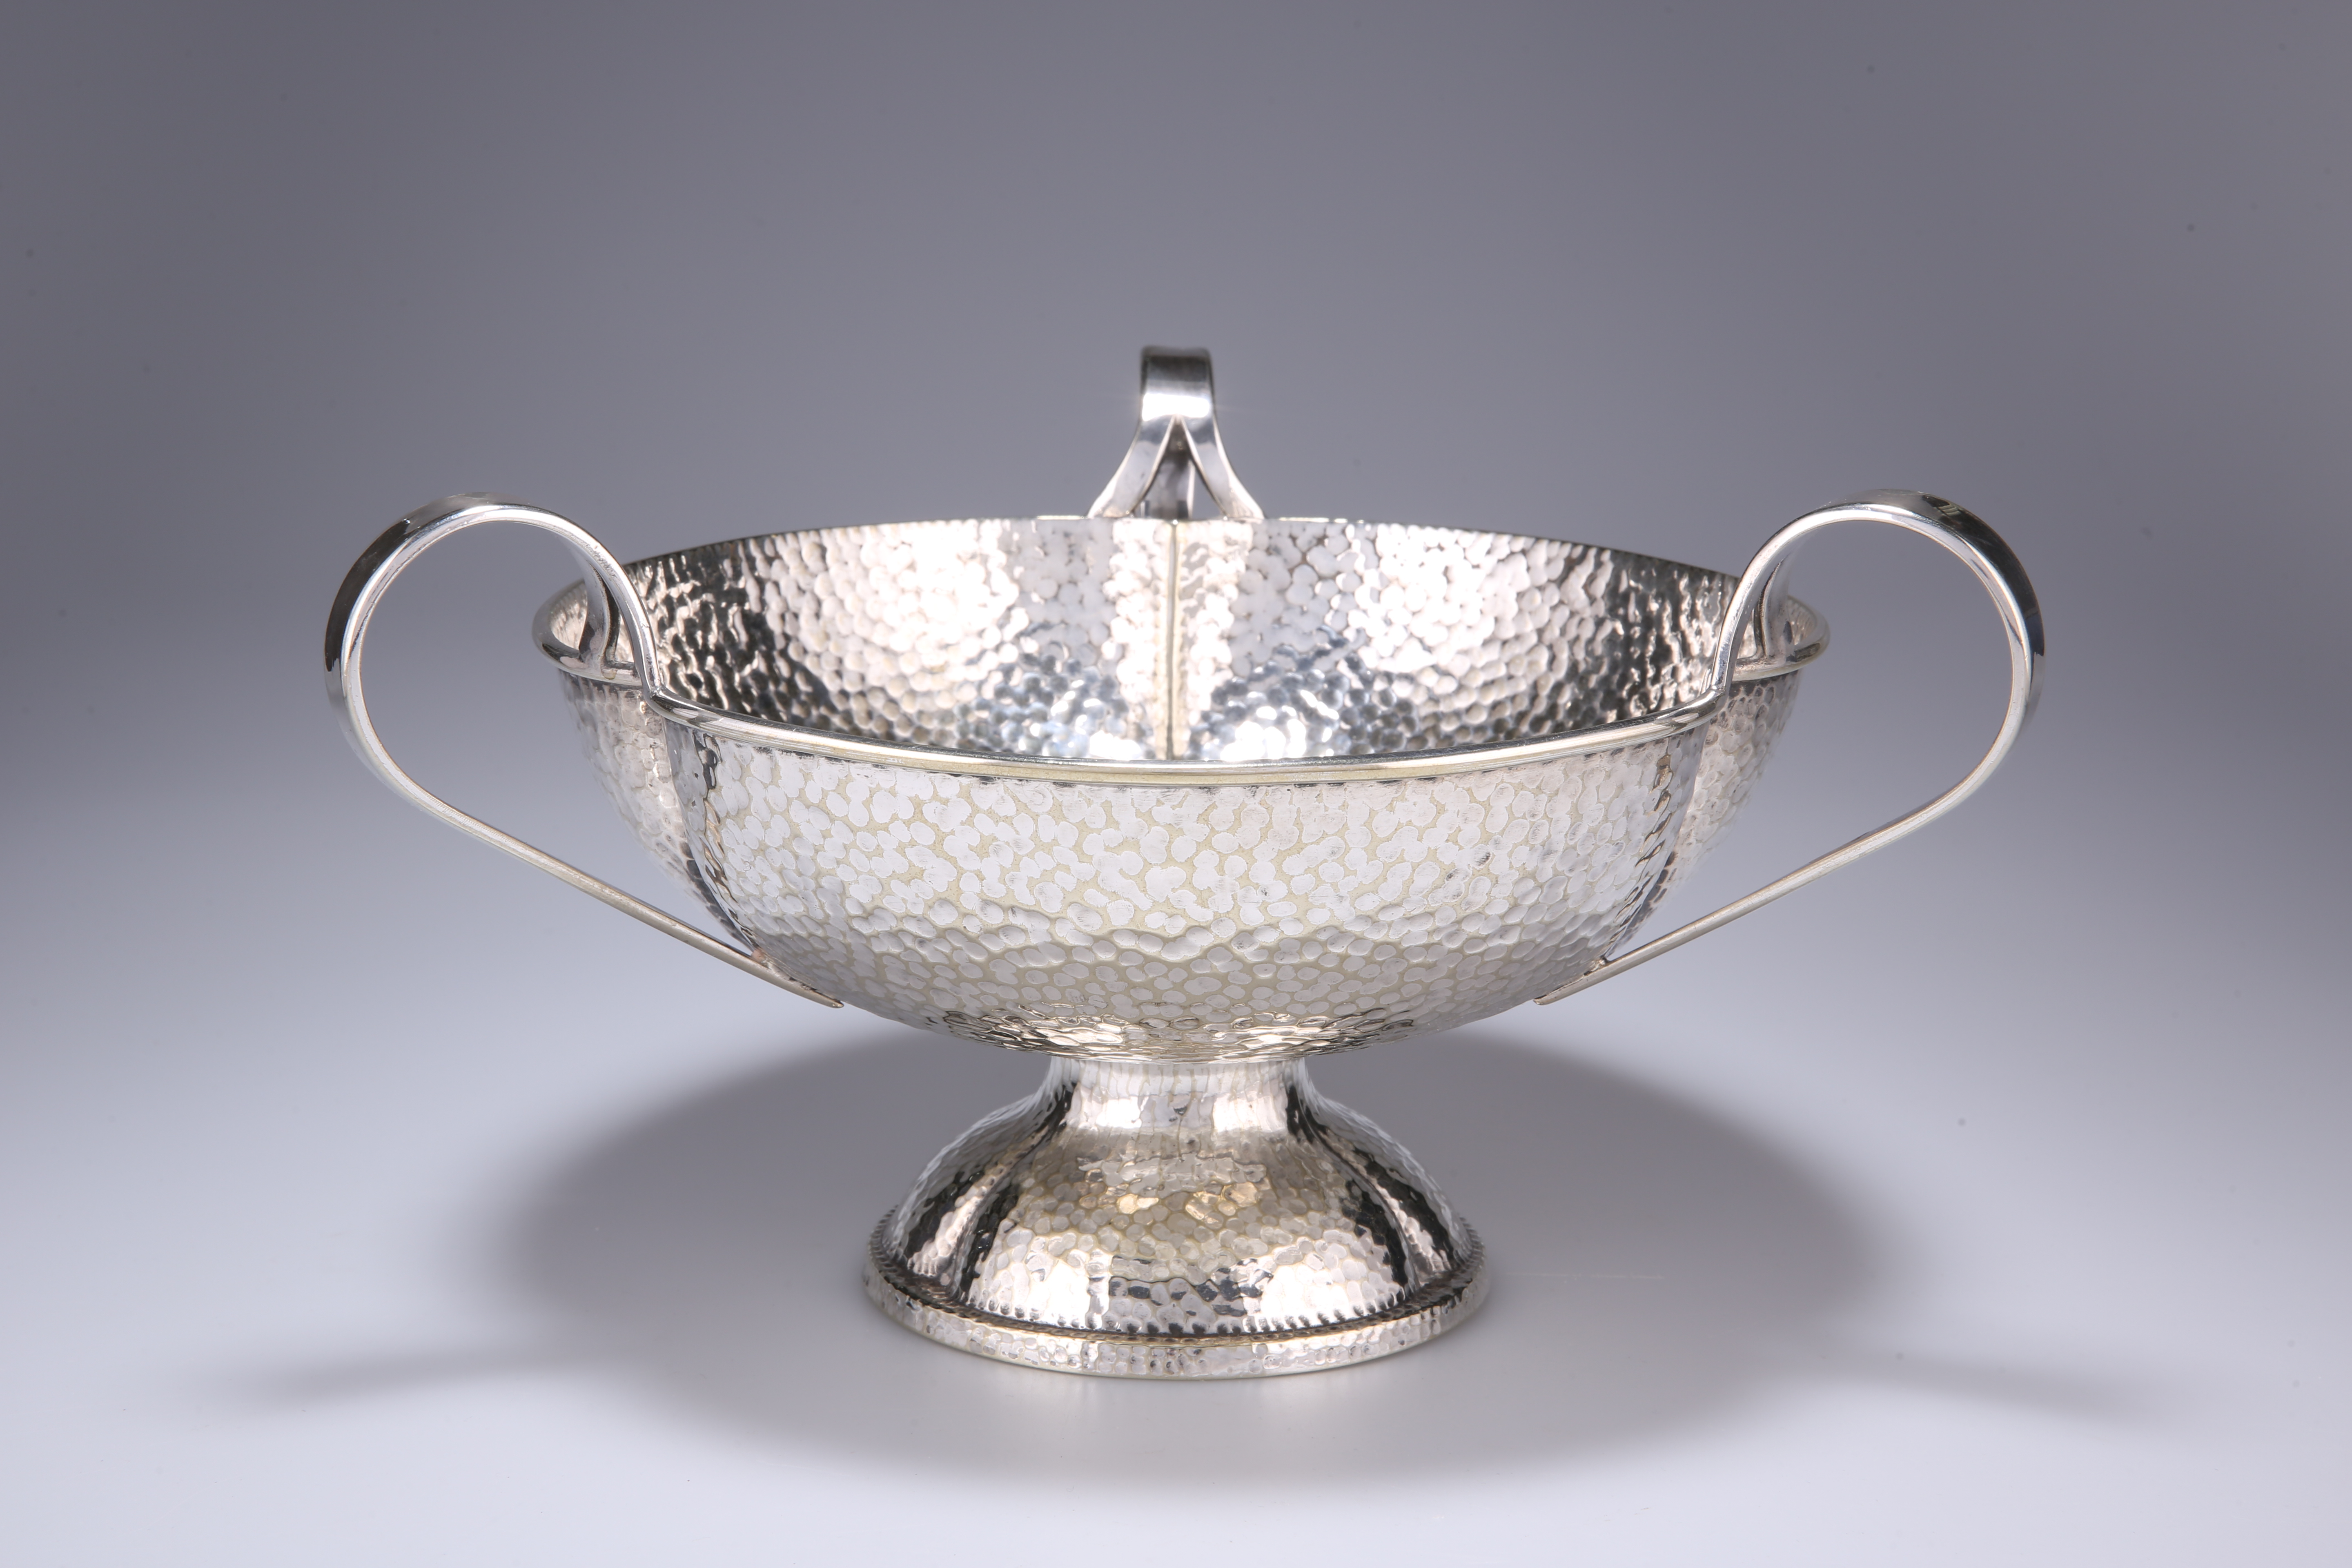 AN ART NOUVEAU SILVER-PLATED THREE-HANDLED TAZZA - Image 2 of 3